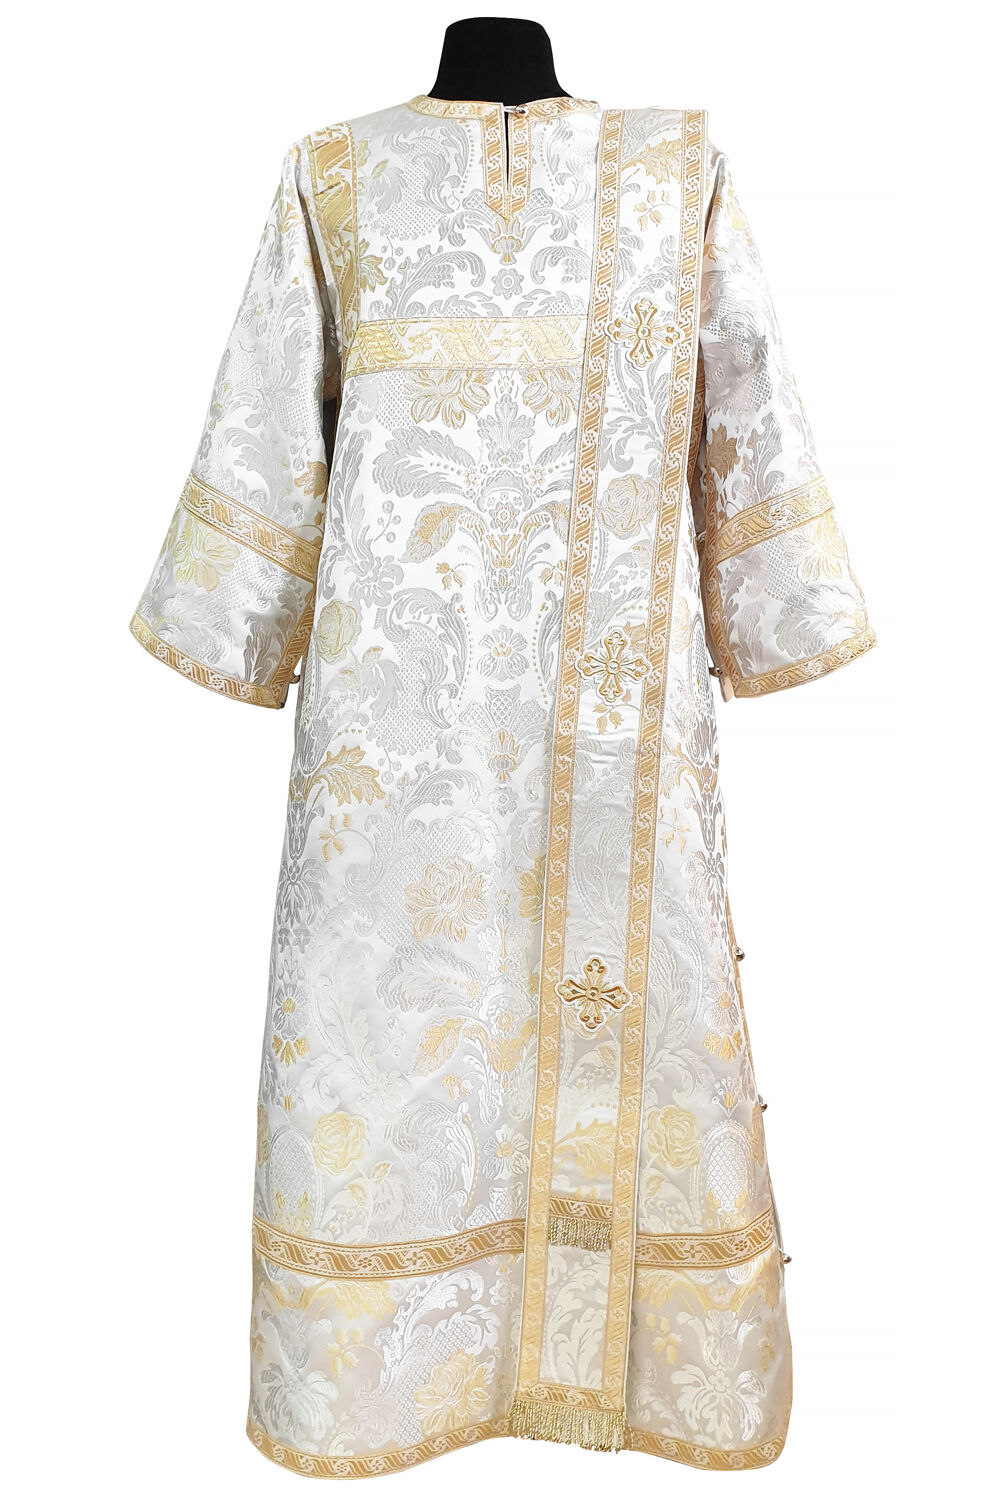 Vestment of Deacon white with gold